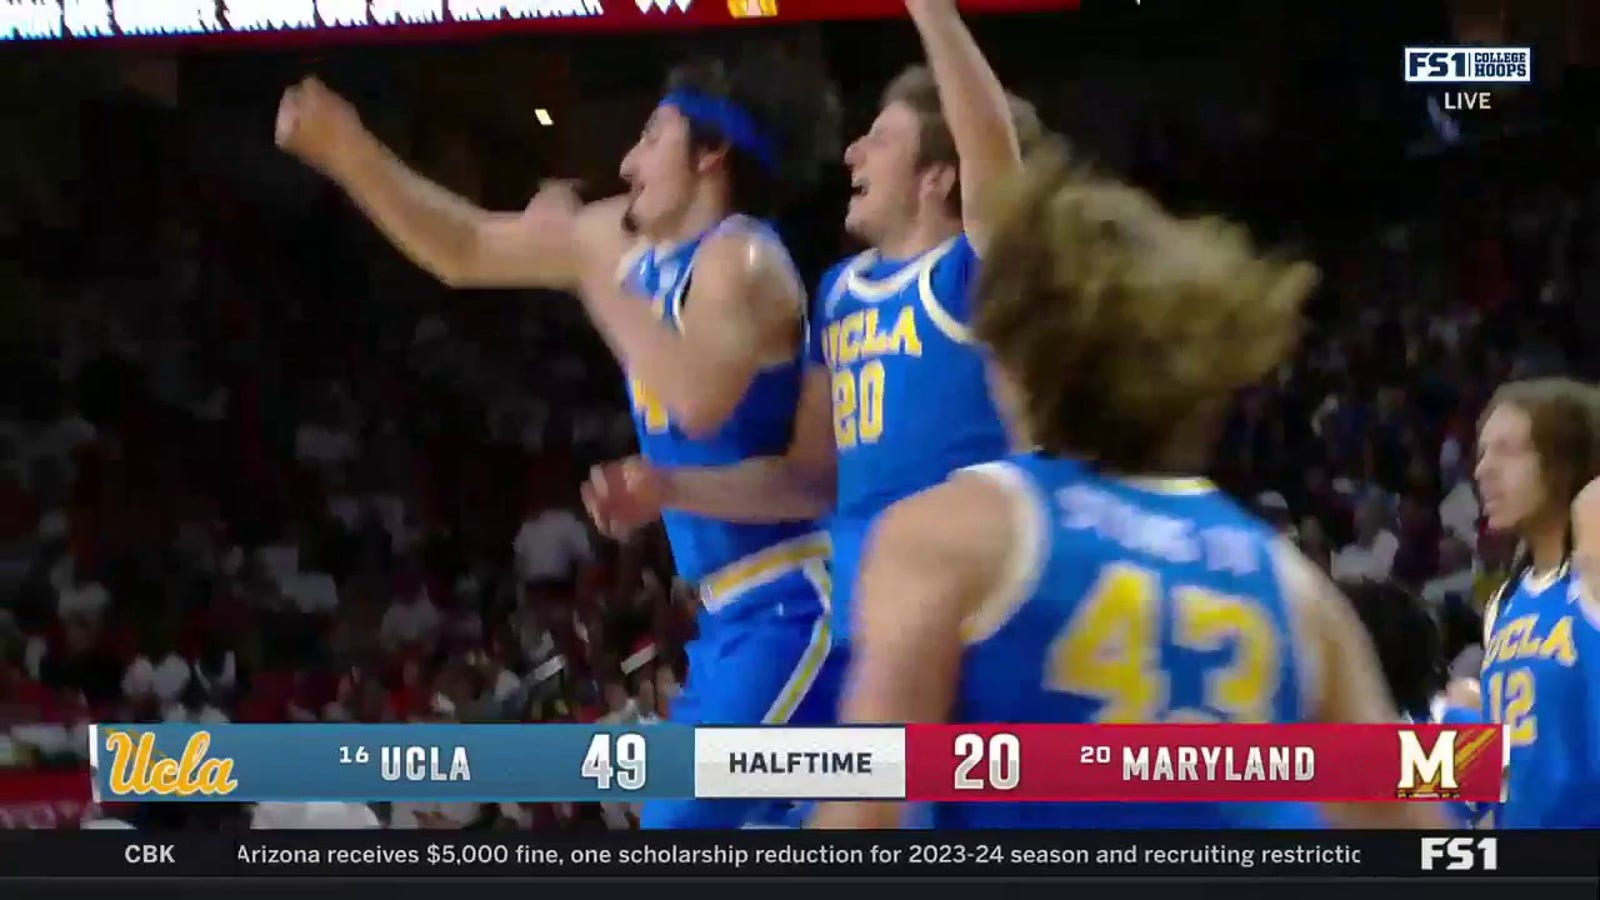 Jaime Jaquez's shot at the buzzer caps off an incredible first half for UCLA